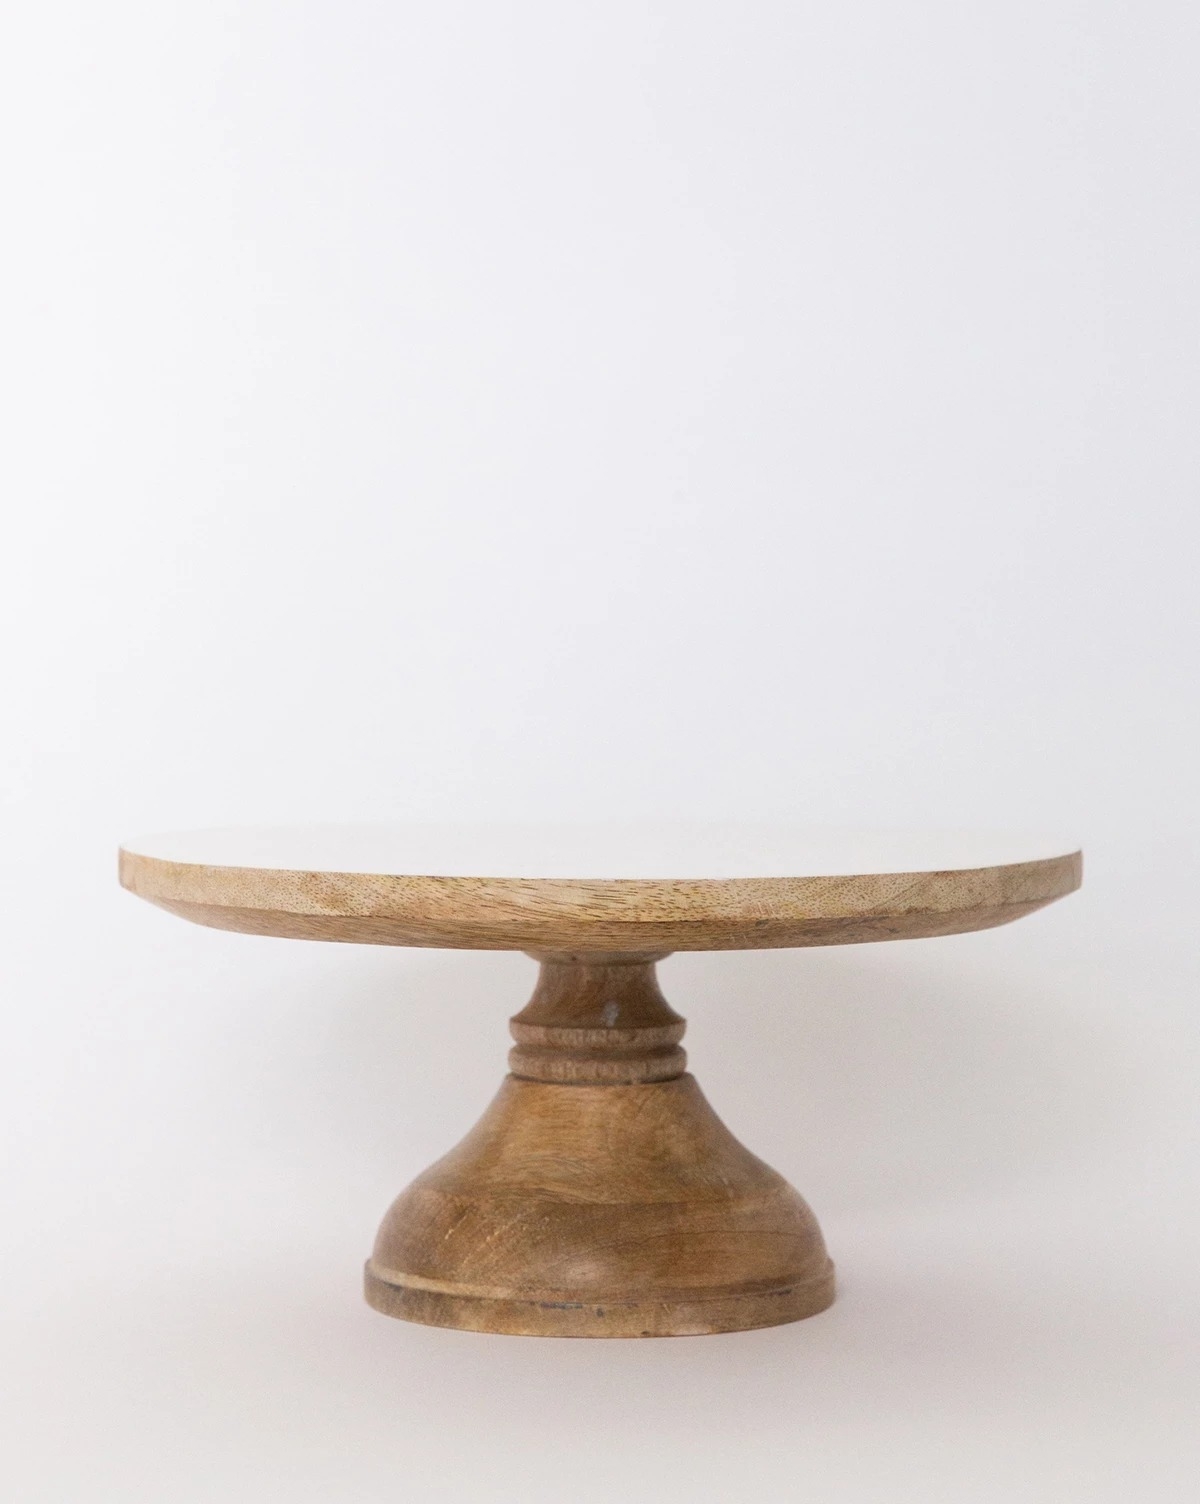 CRAFTED WOOD CAKE STAND - Image 1